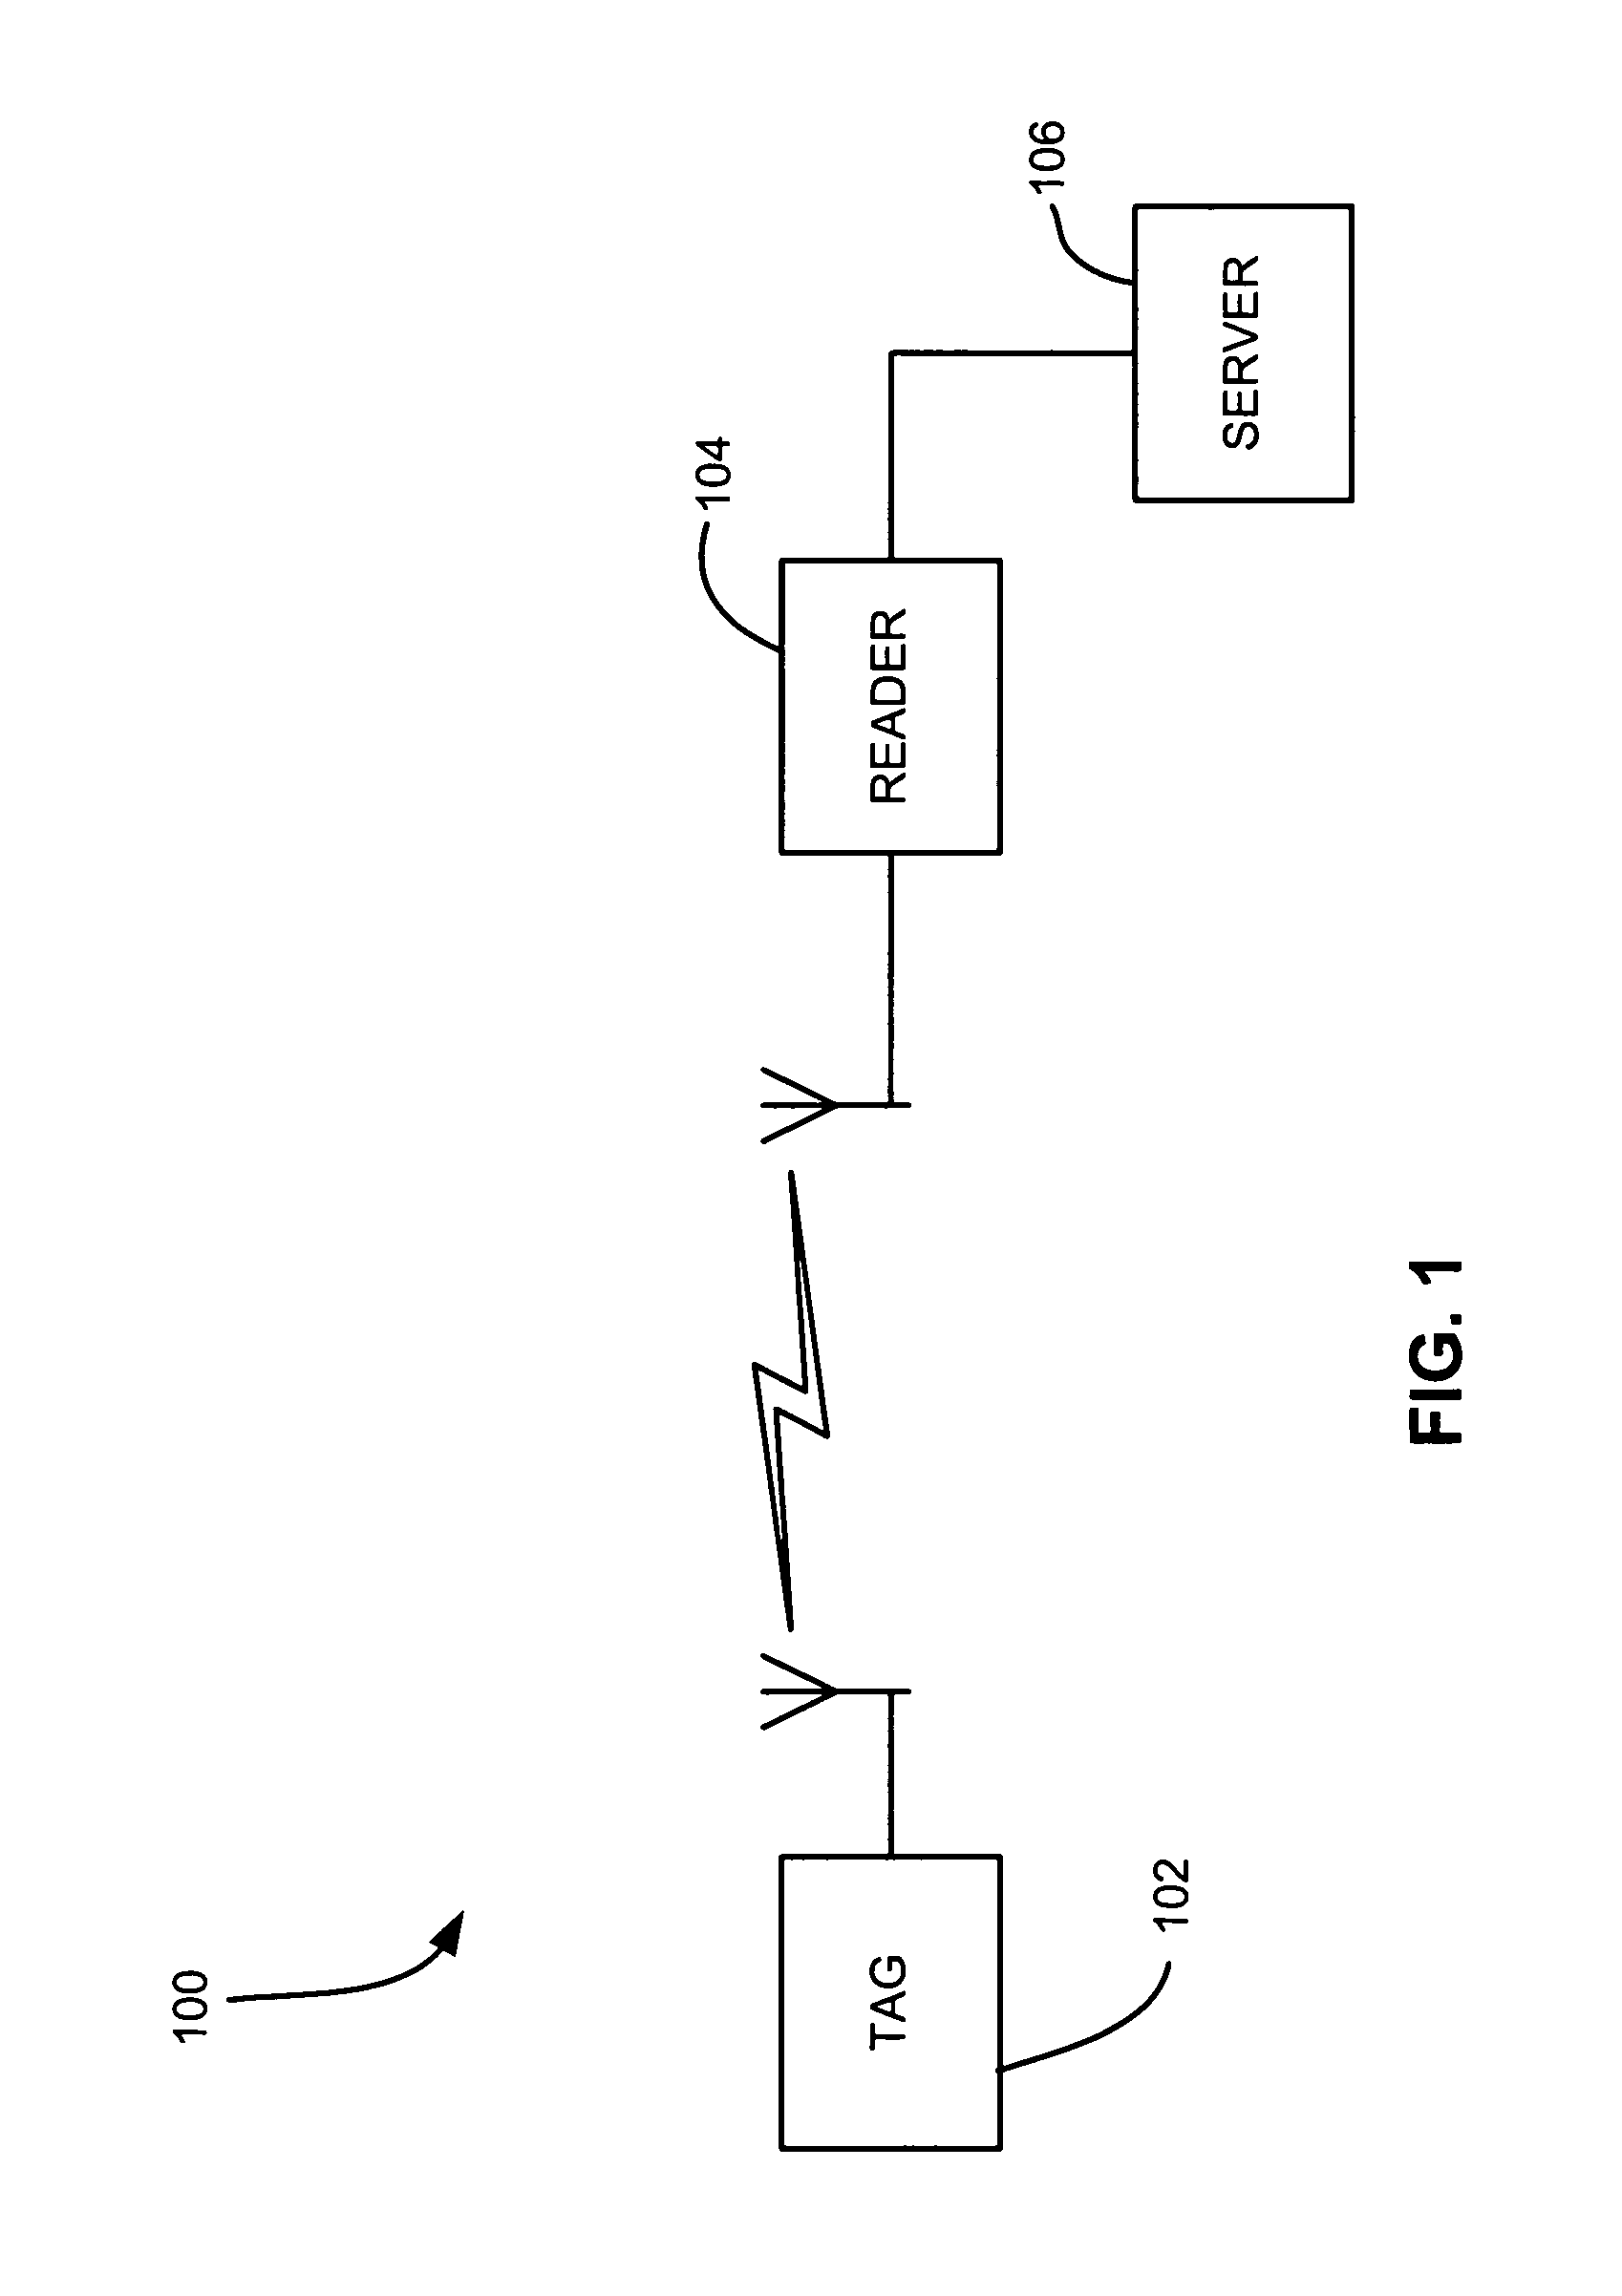 Differential input circuit with process variation and temperature compensation